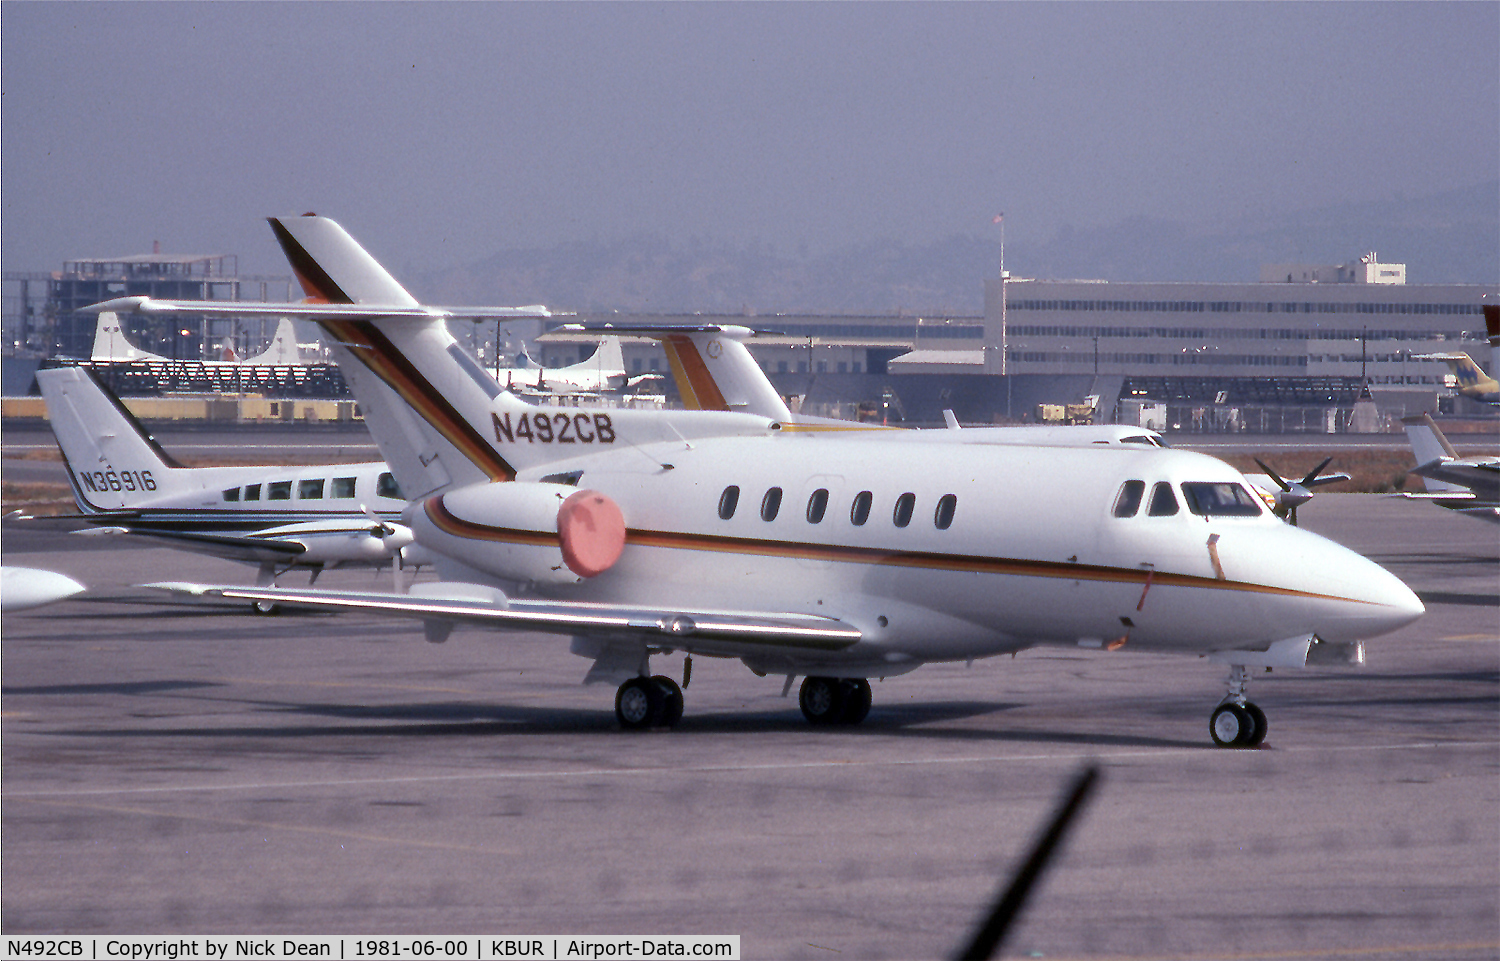 N492CB, 1979 Hawker Siddeley HS125 700A C/N 257056, KBUR (Japanese Navy P-3's prior to delivery on the Lockheed ramp in the background)